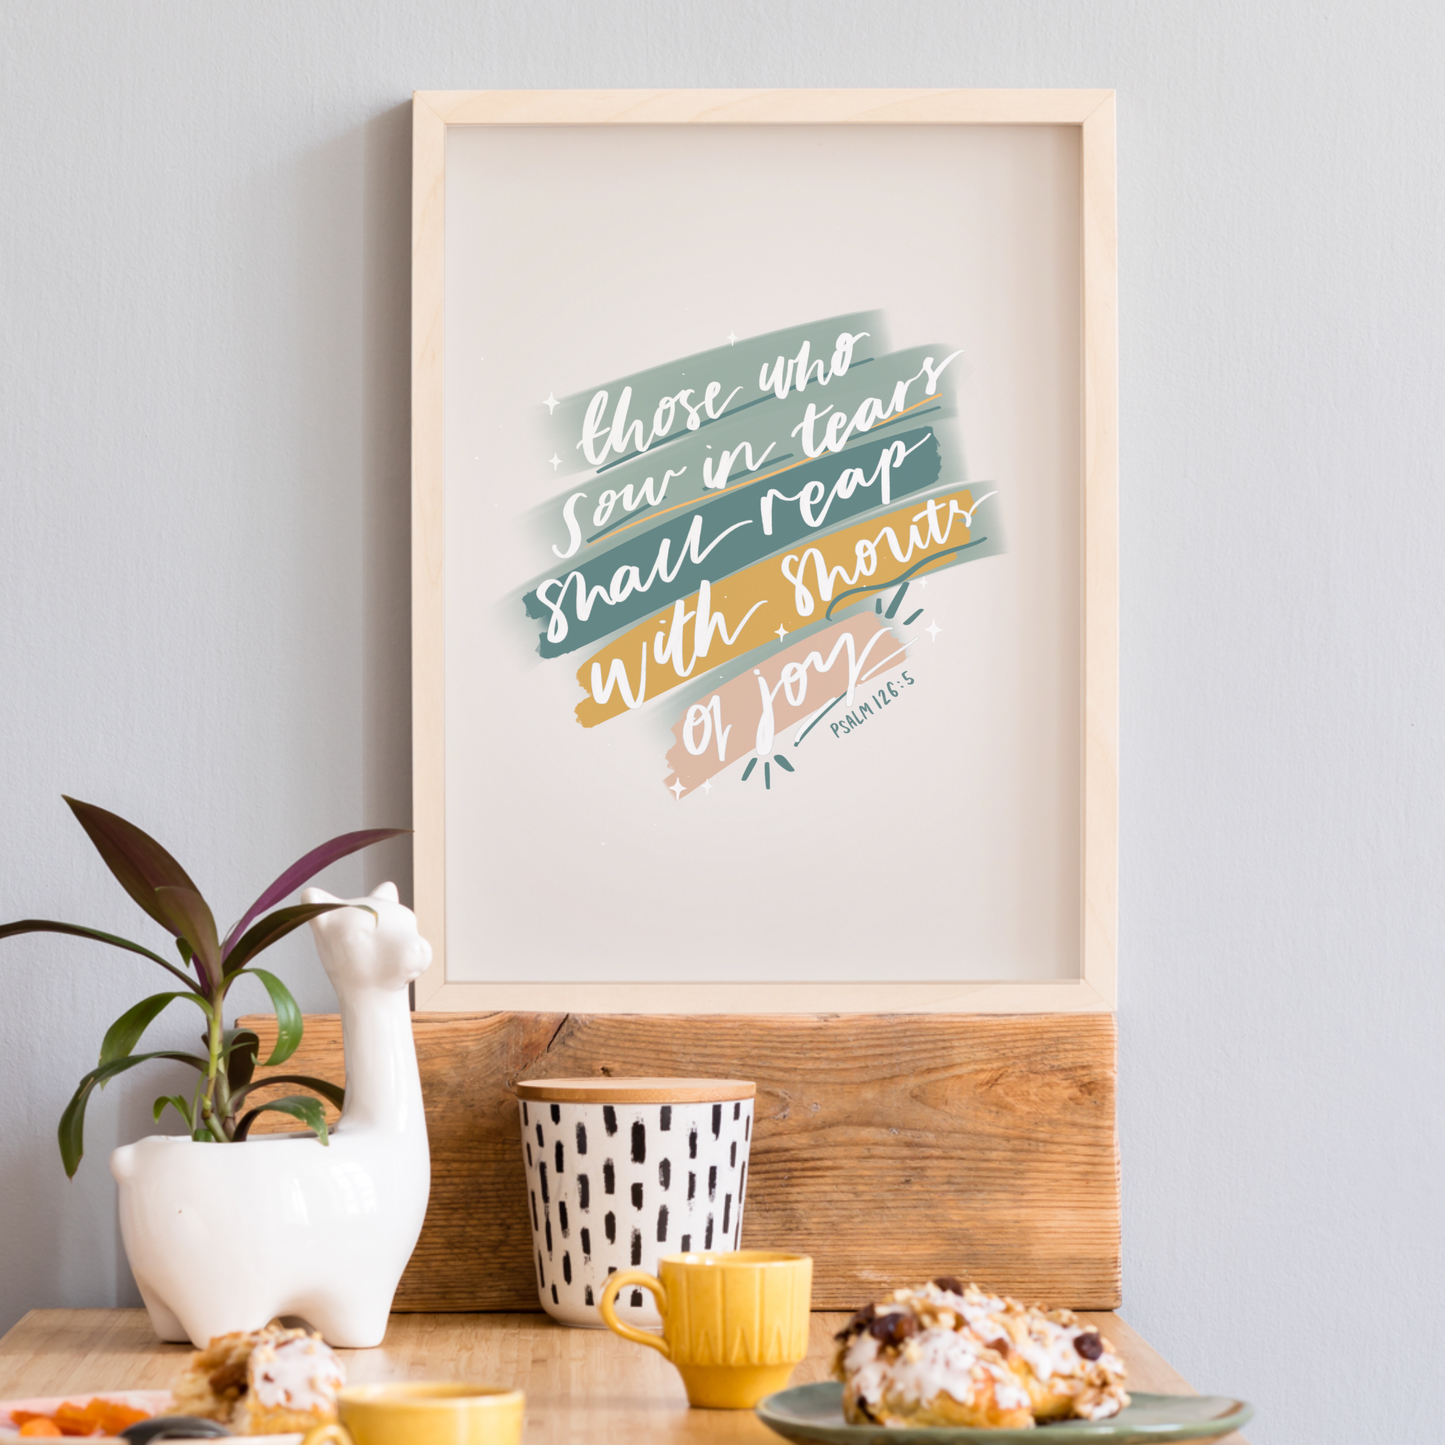 Those who sow in tears - Psalm 126:5 Print